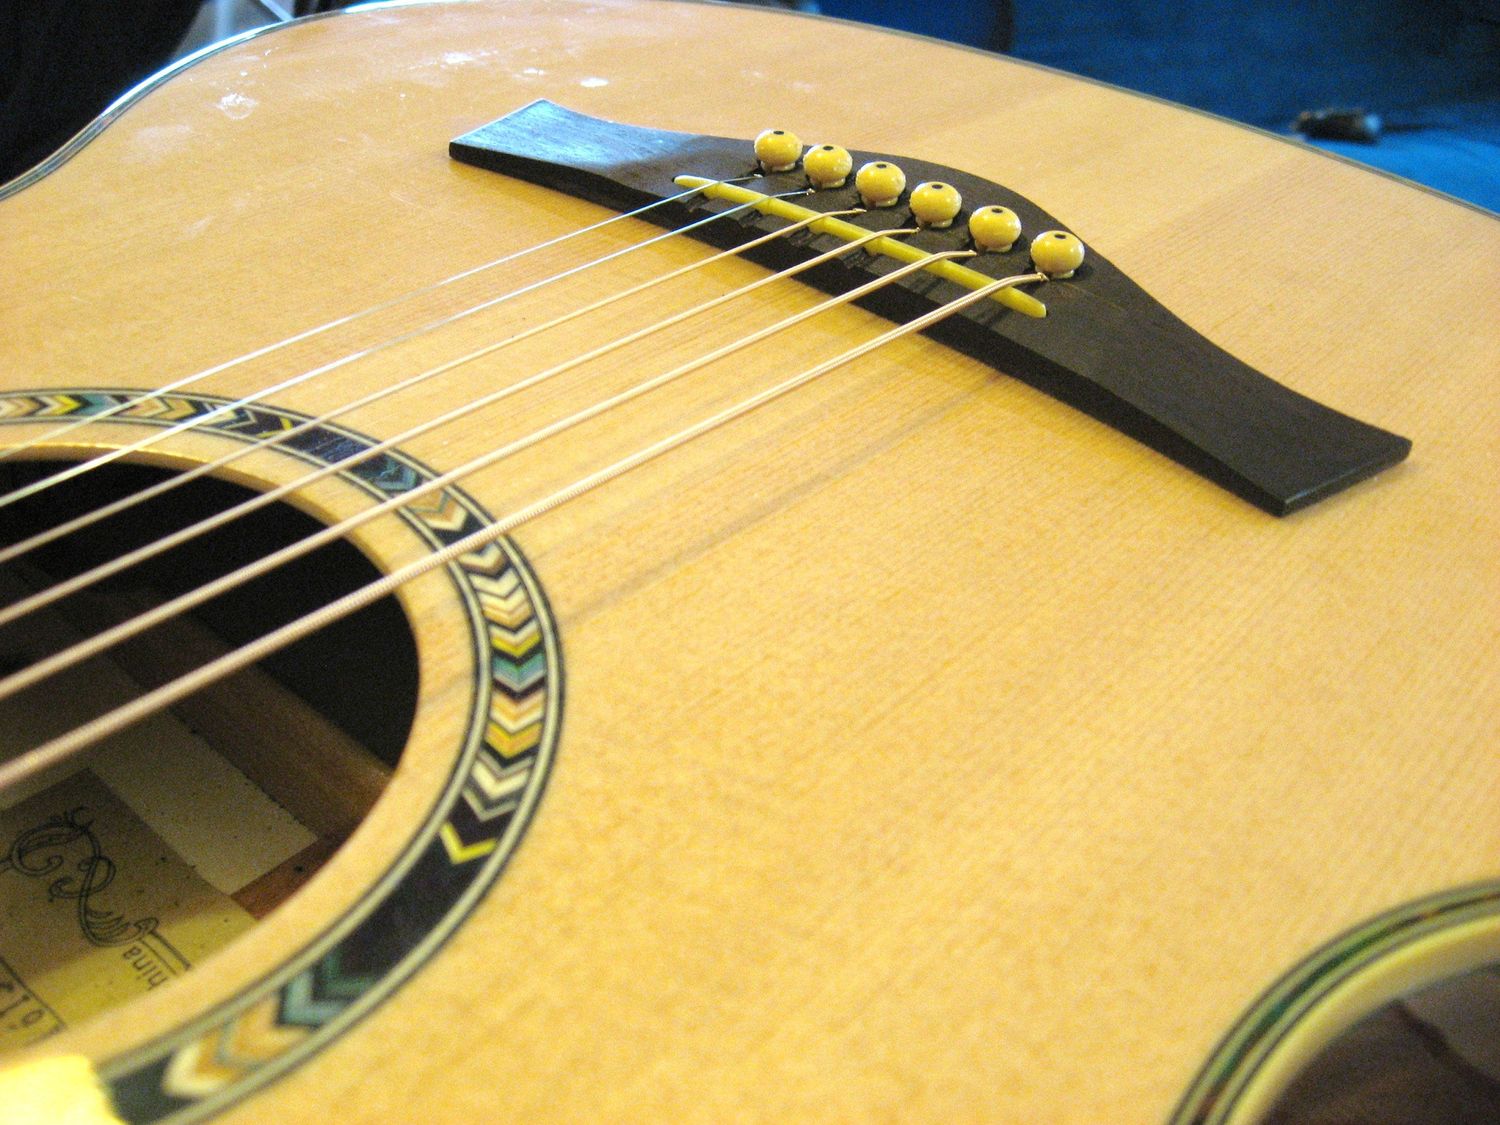 How To Install A Bridge On An Acoustic Guitar